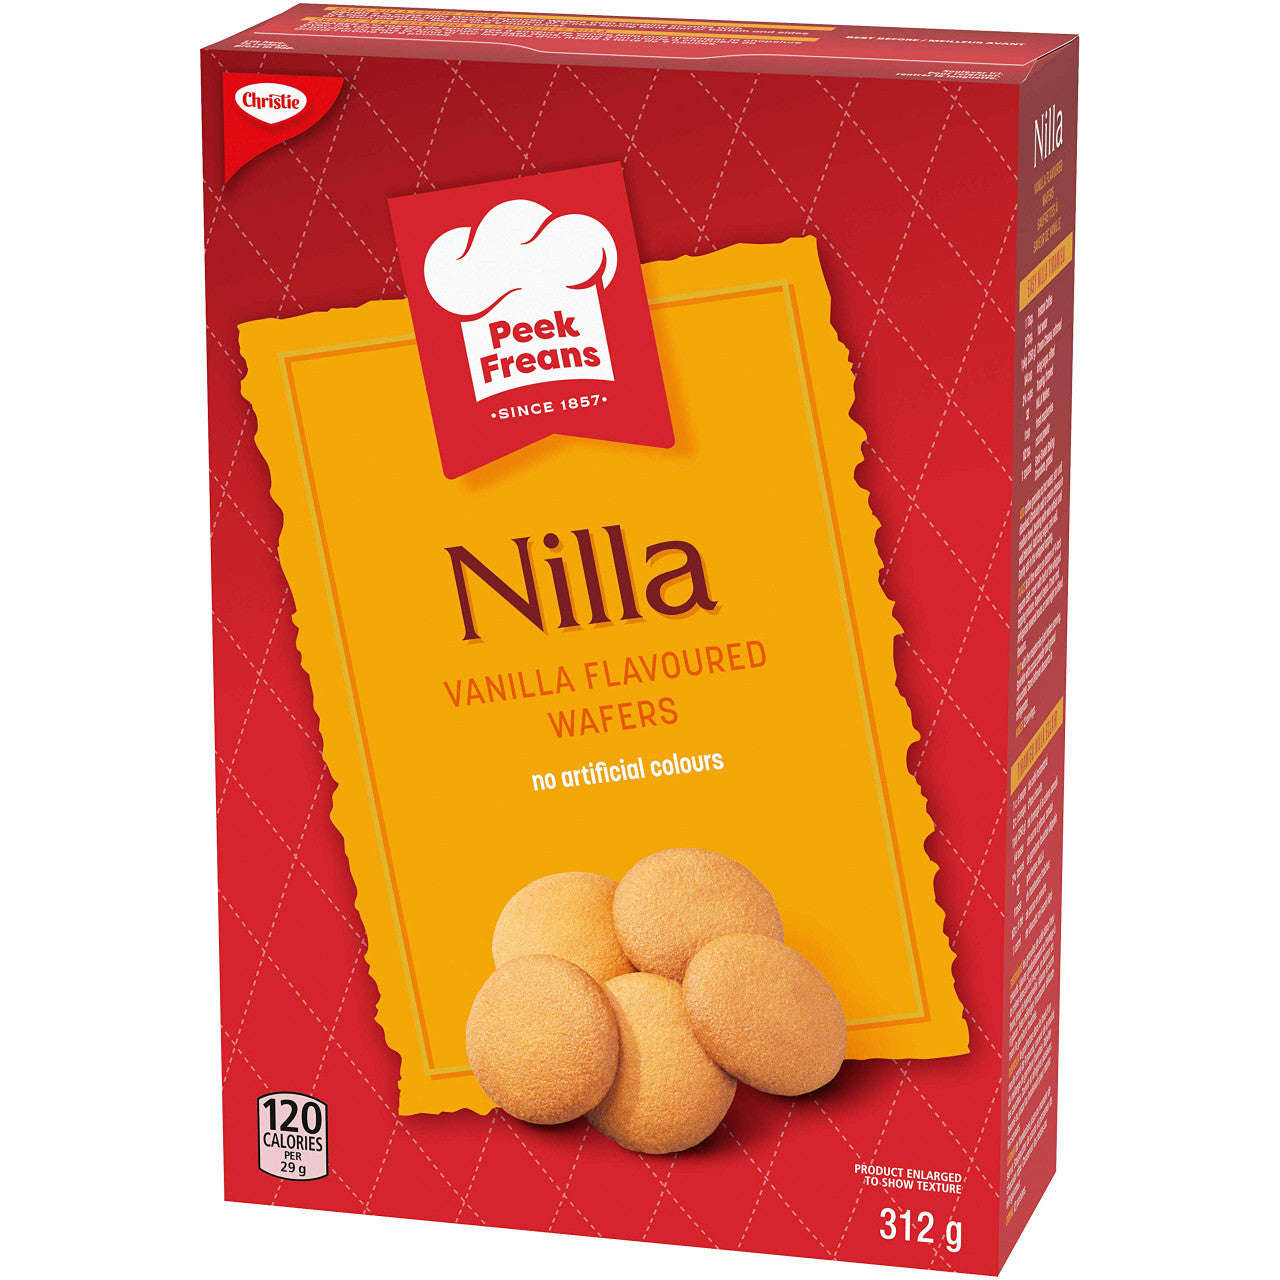 Christie, Peek Freans, Nilla, Vanilla Wafers, 312g/11 oz., {Imported from Canada}